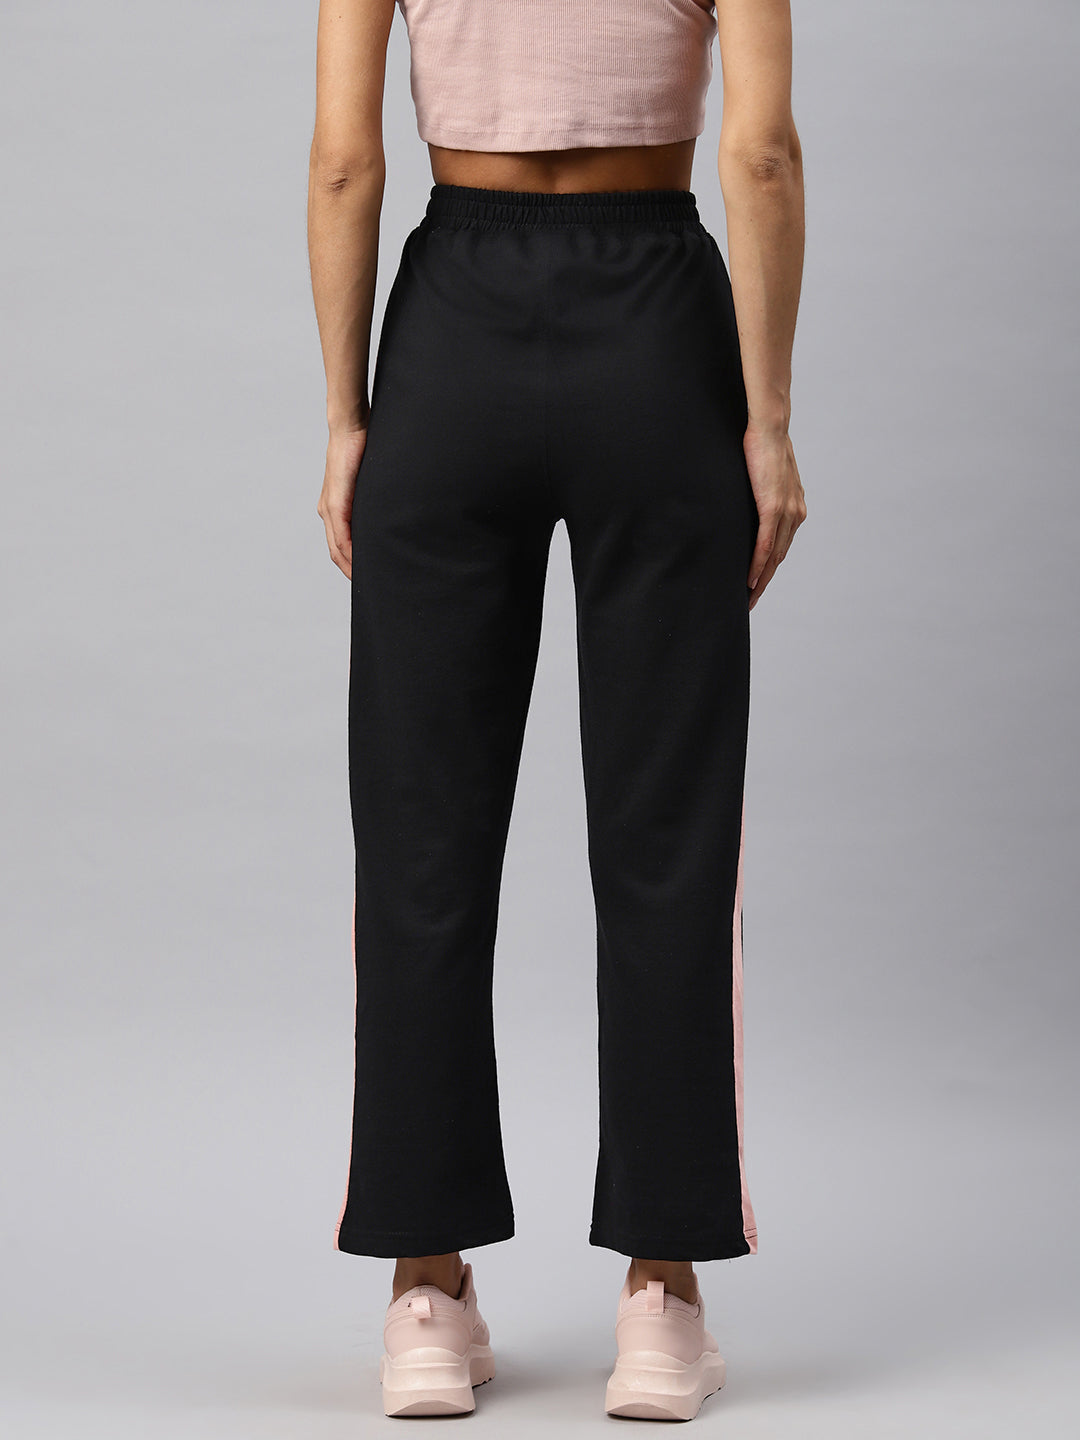 Black Trackpants With Side Stripes